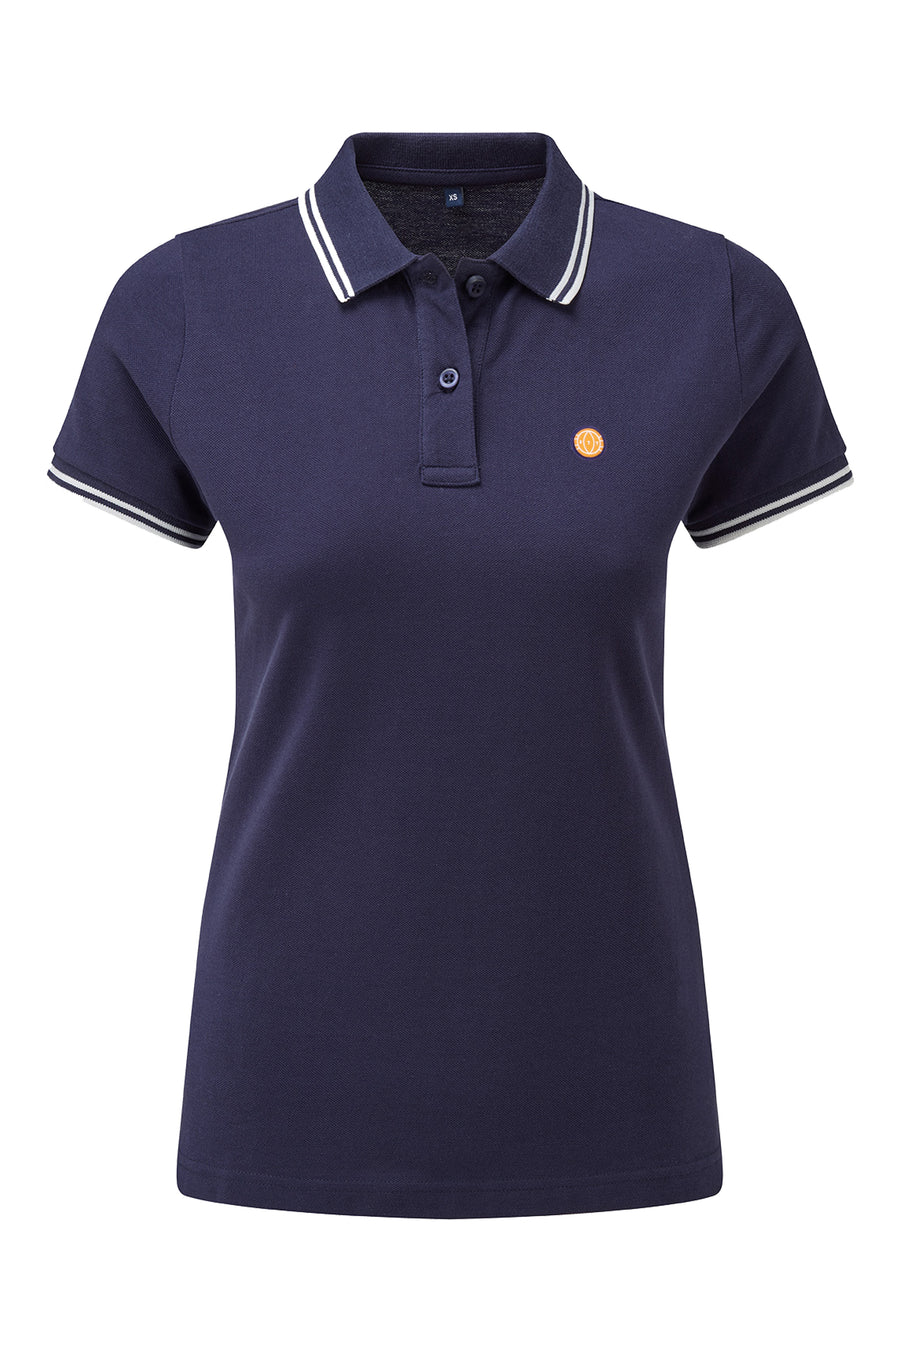 Women's Navy and White Tipped FTT Polo